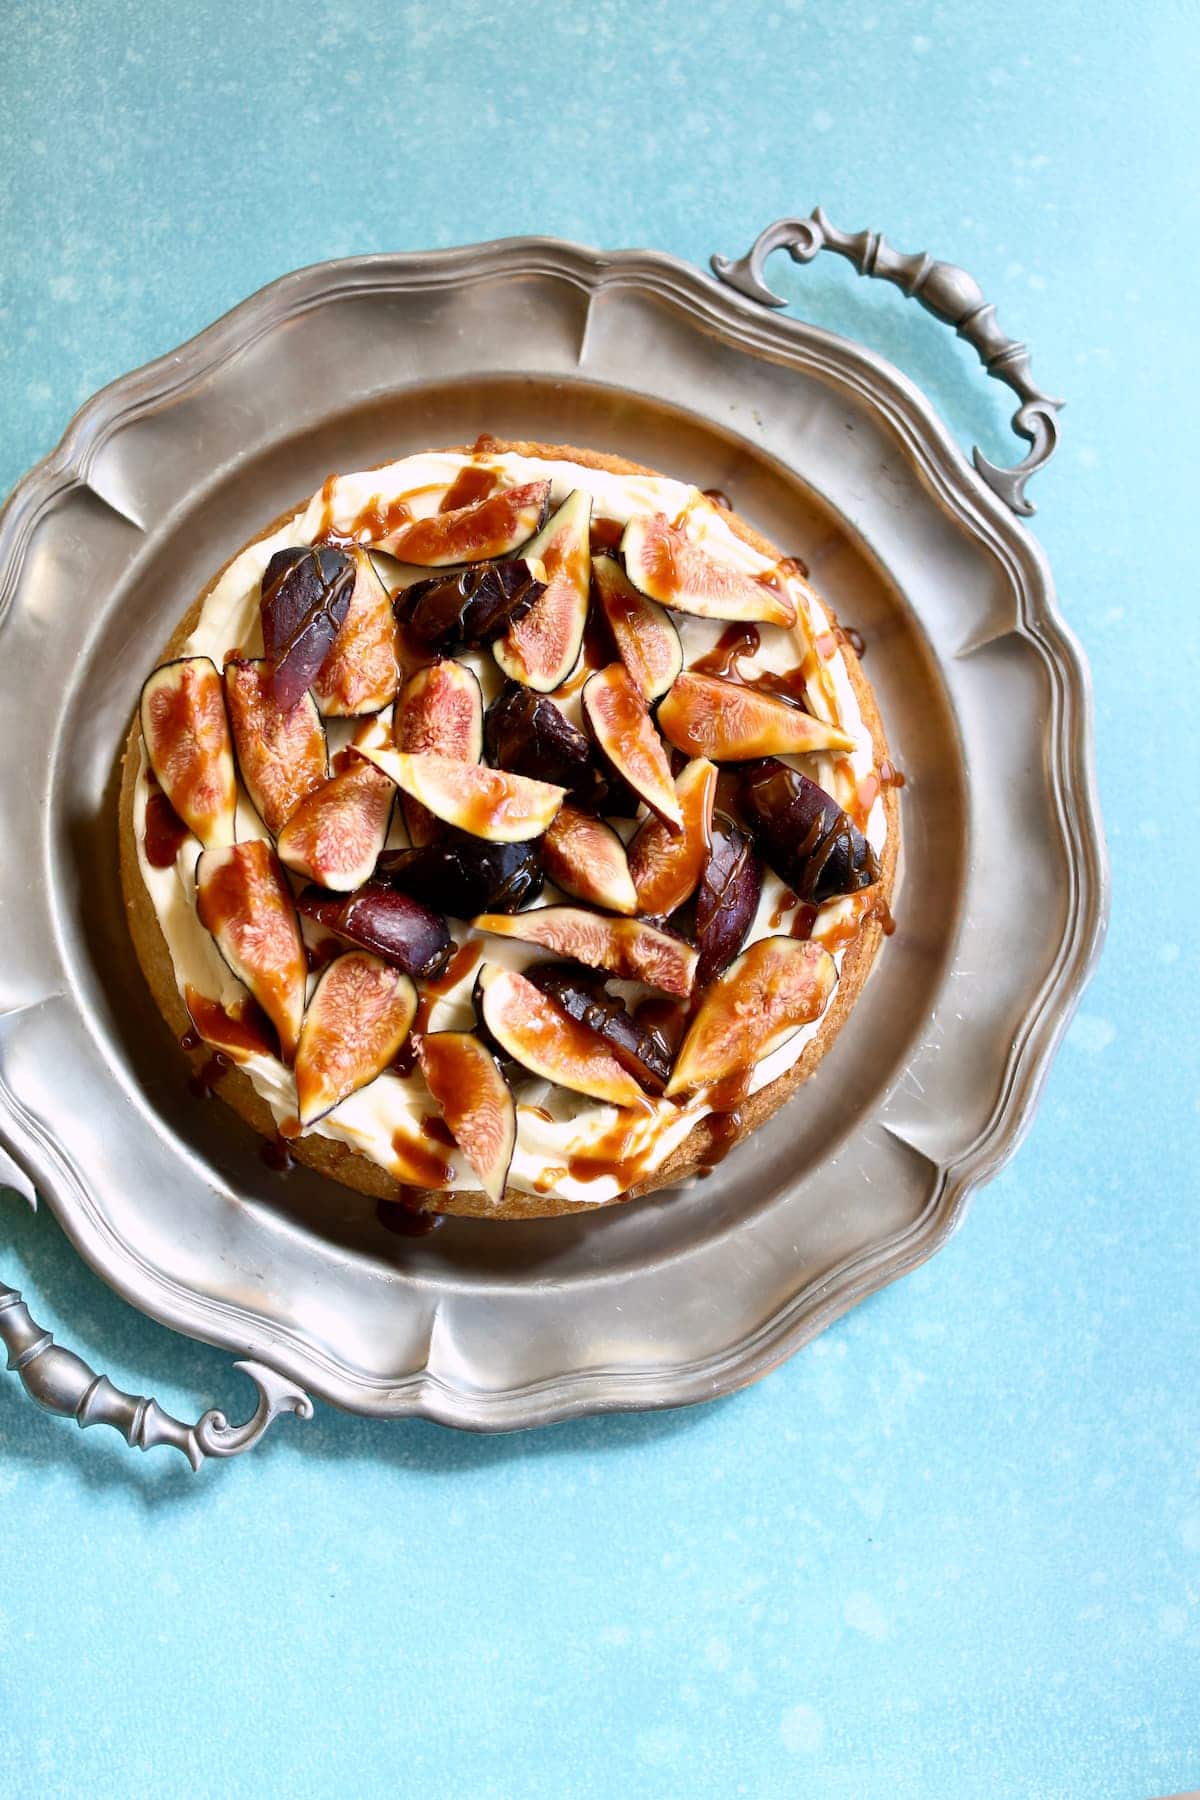 a cake with figs on it on a silver plate.